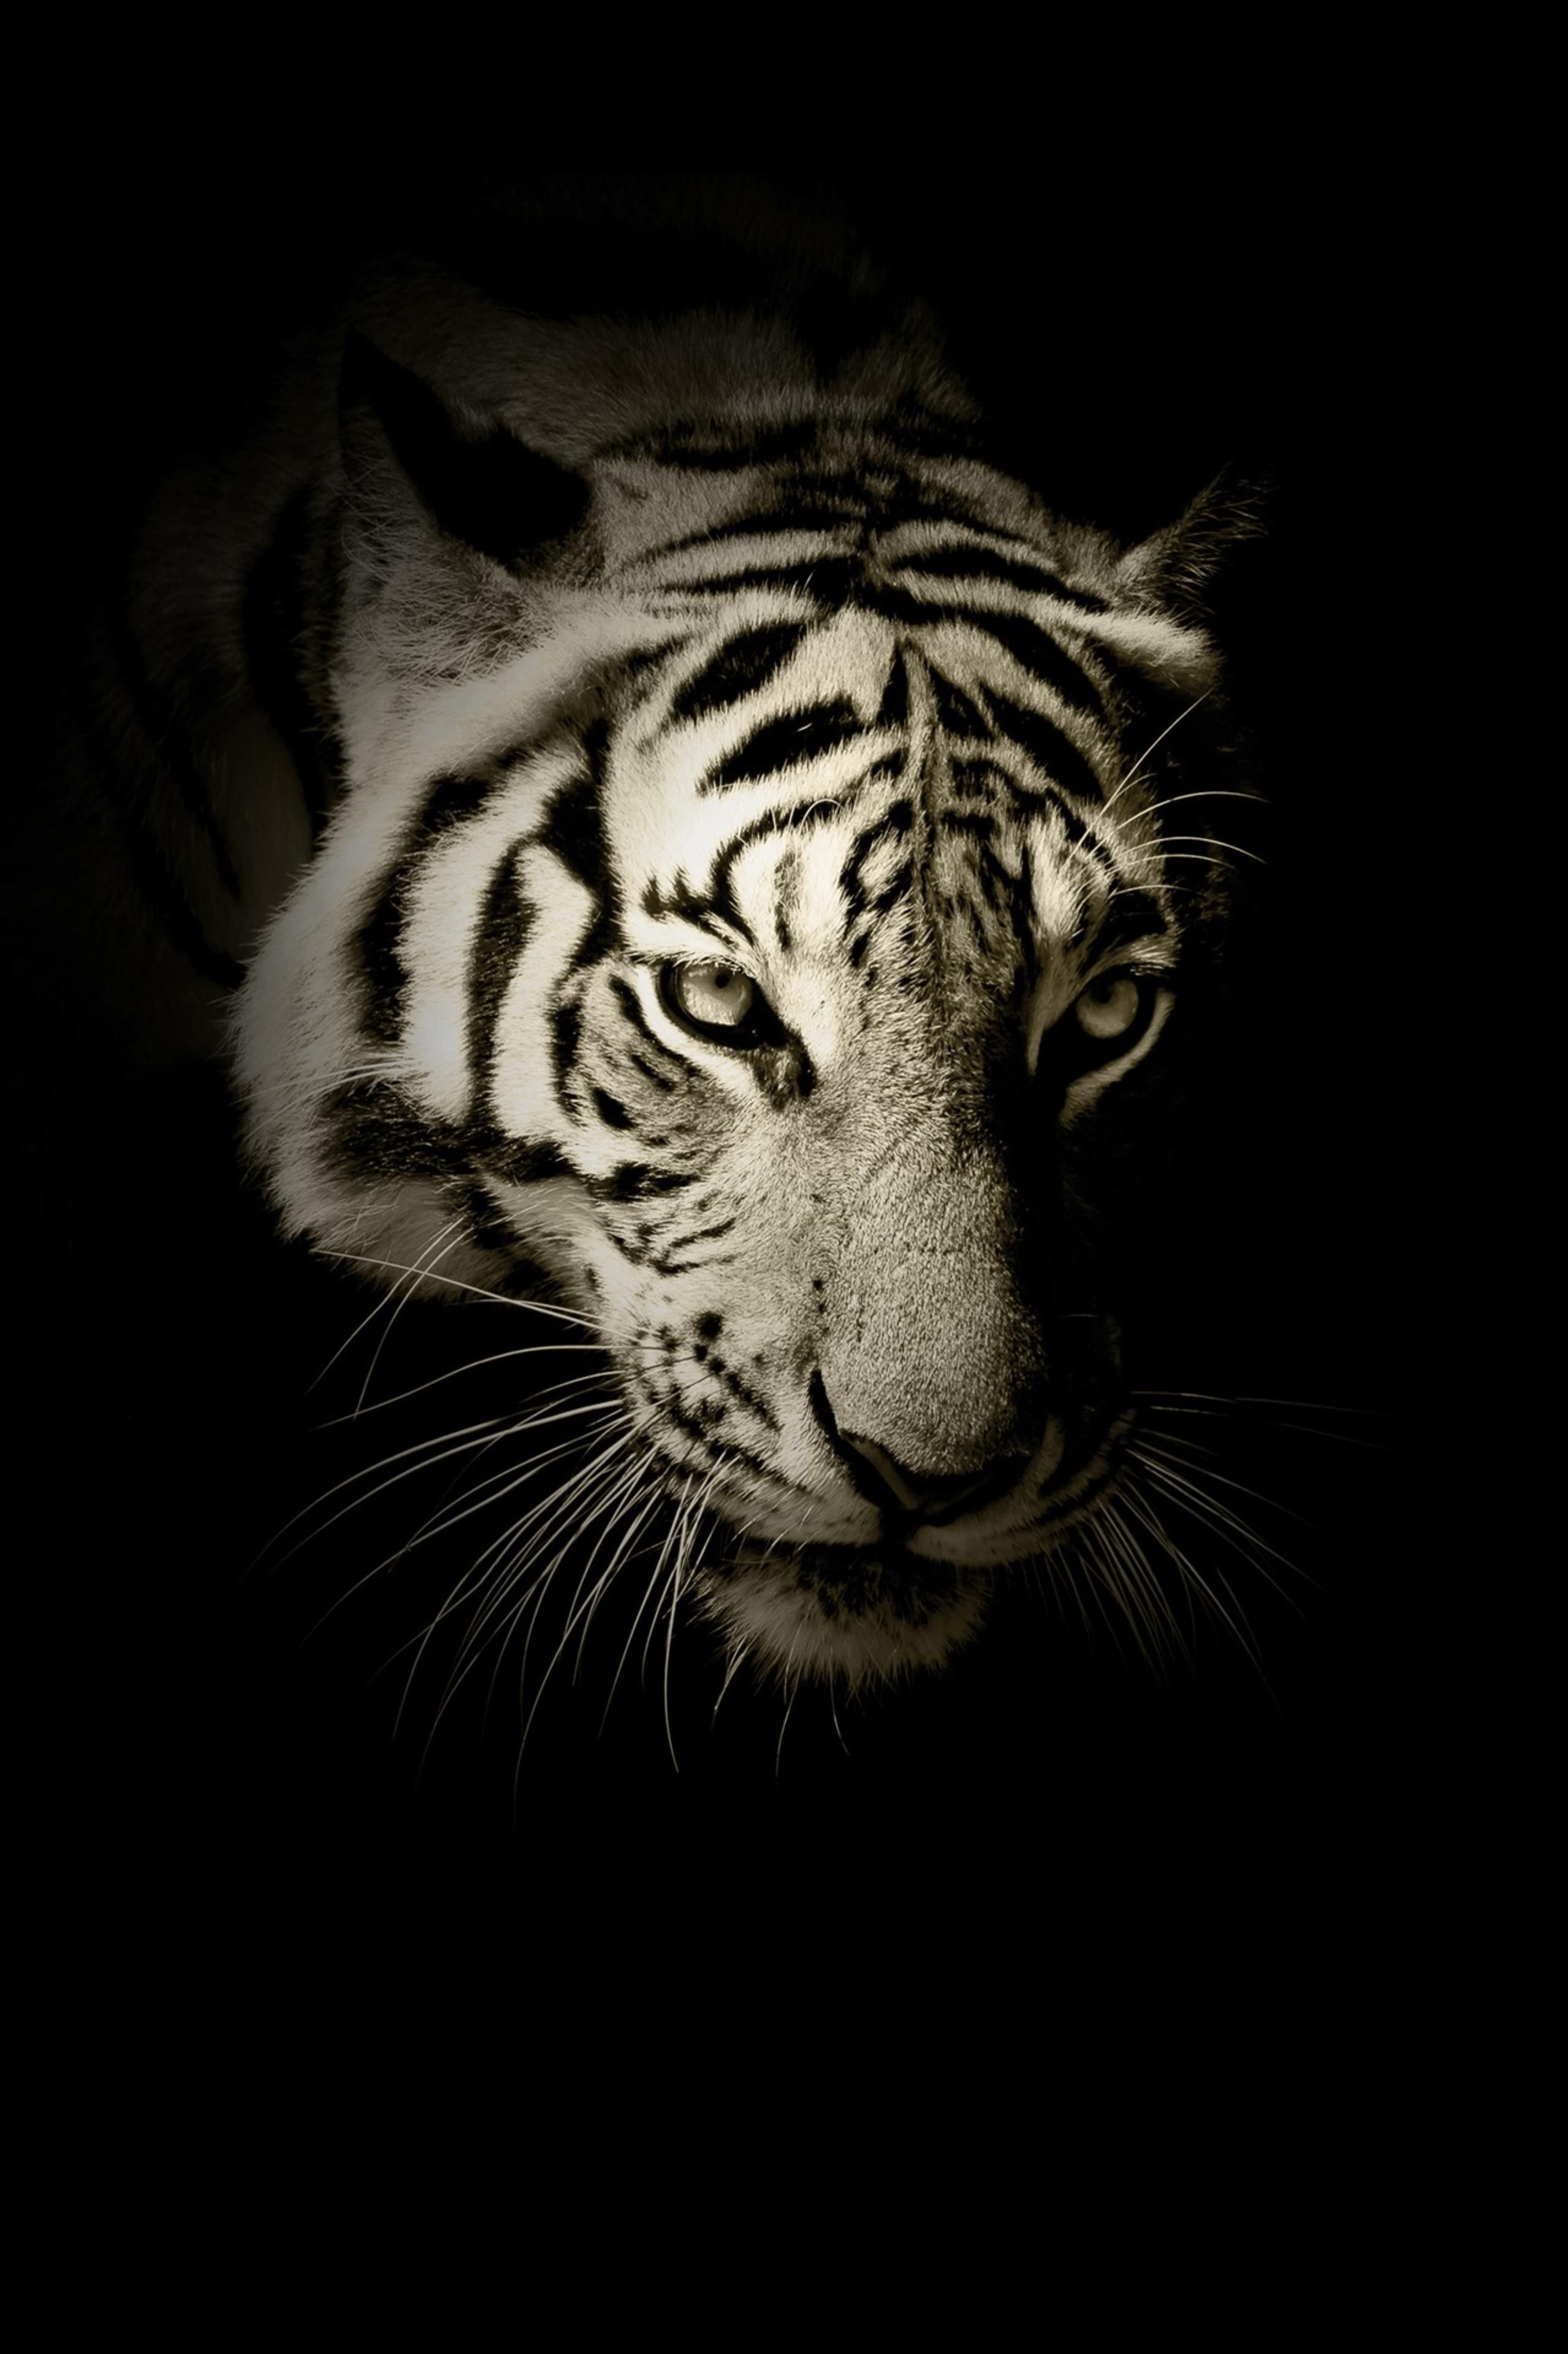 AMOLED Animal Wallpaper. Tiger quotes, Animal wallpaper, Beast quotes